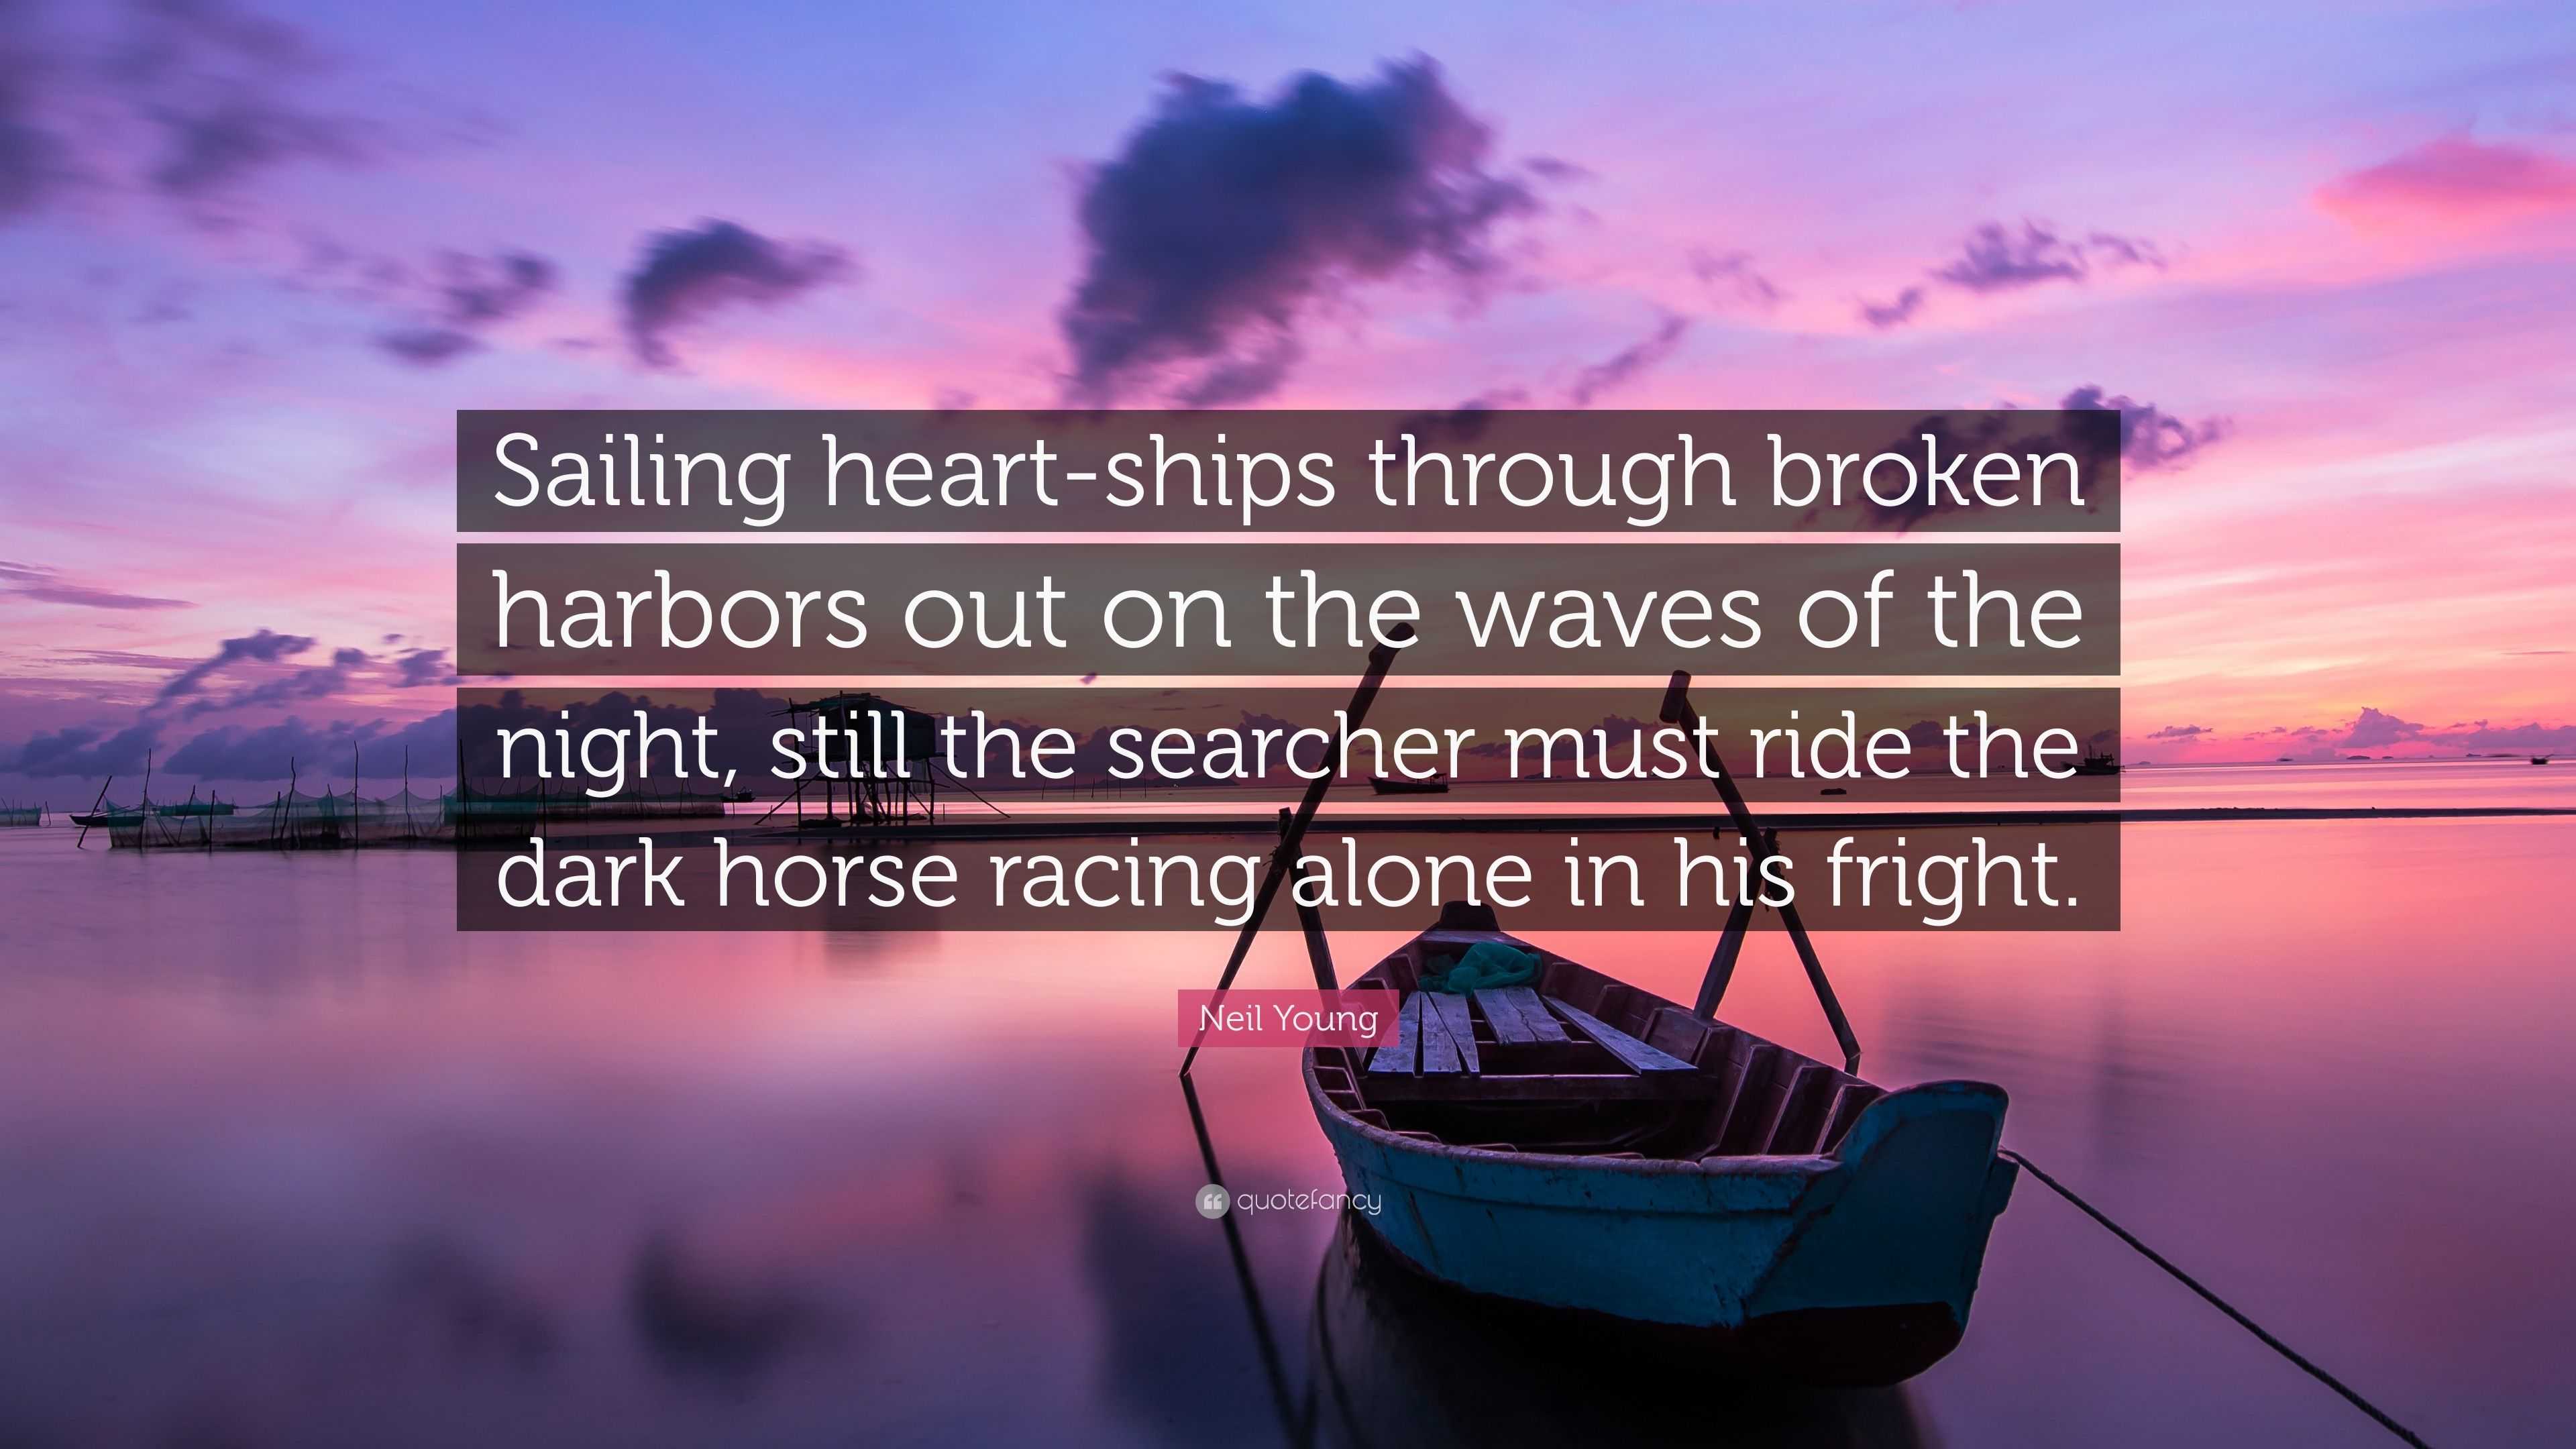 Neil Young Quote: “Sailing heart-ships through broken harbors out on ...